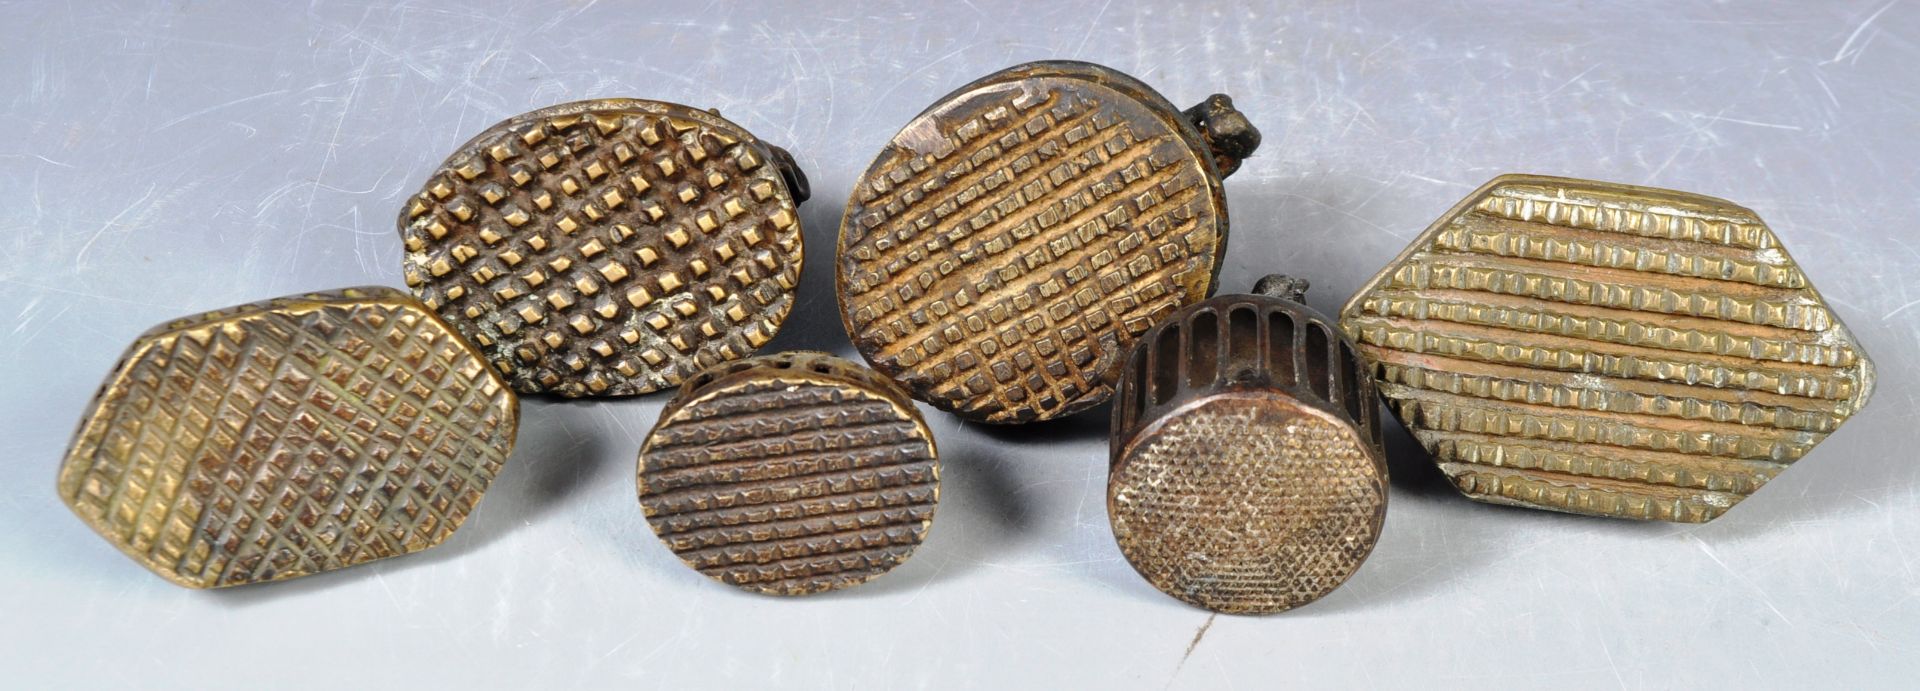 COLLECTION OF SIX INDIAN ANTIQUE FOOT SCRAPERS / SCRUBBERS - Image 8 of 9